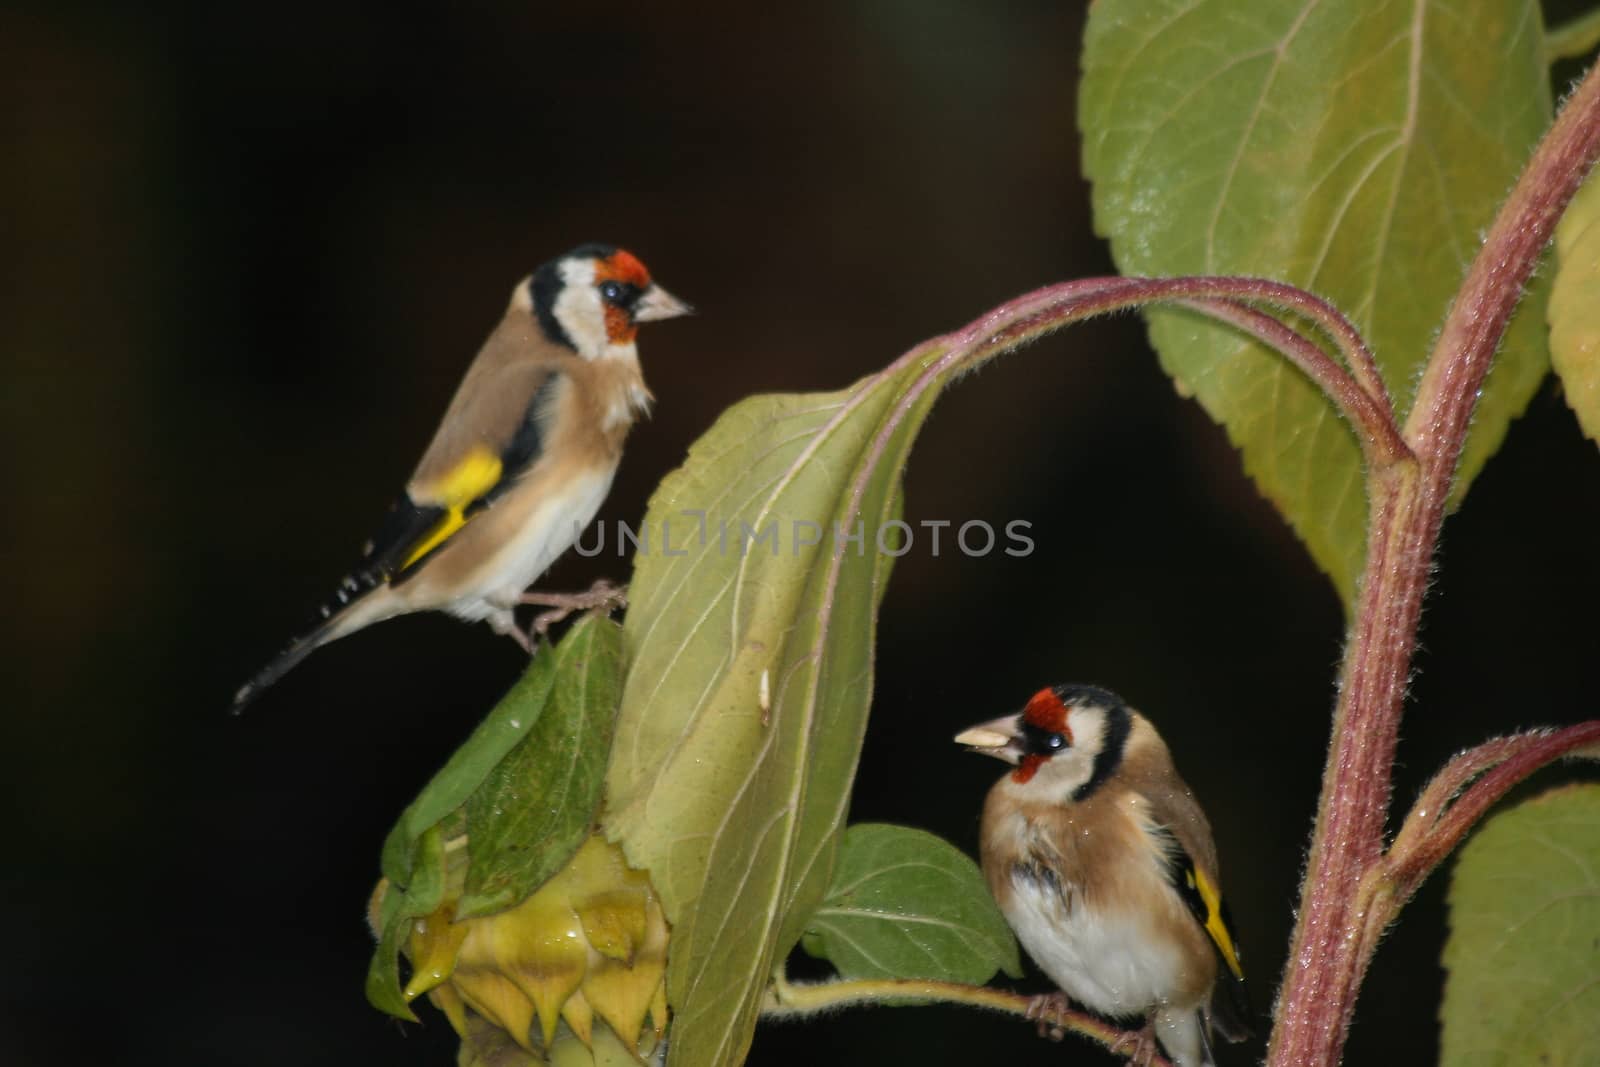 The Goldfinch (Carduelis carduelis) also called thistle finch songbird